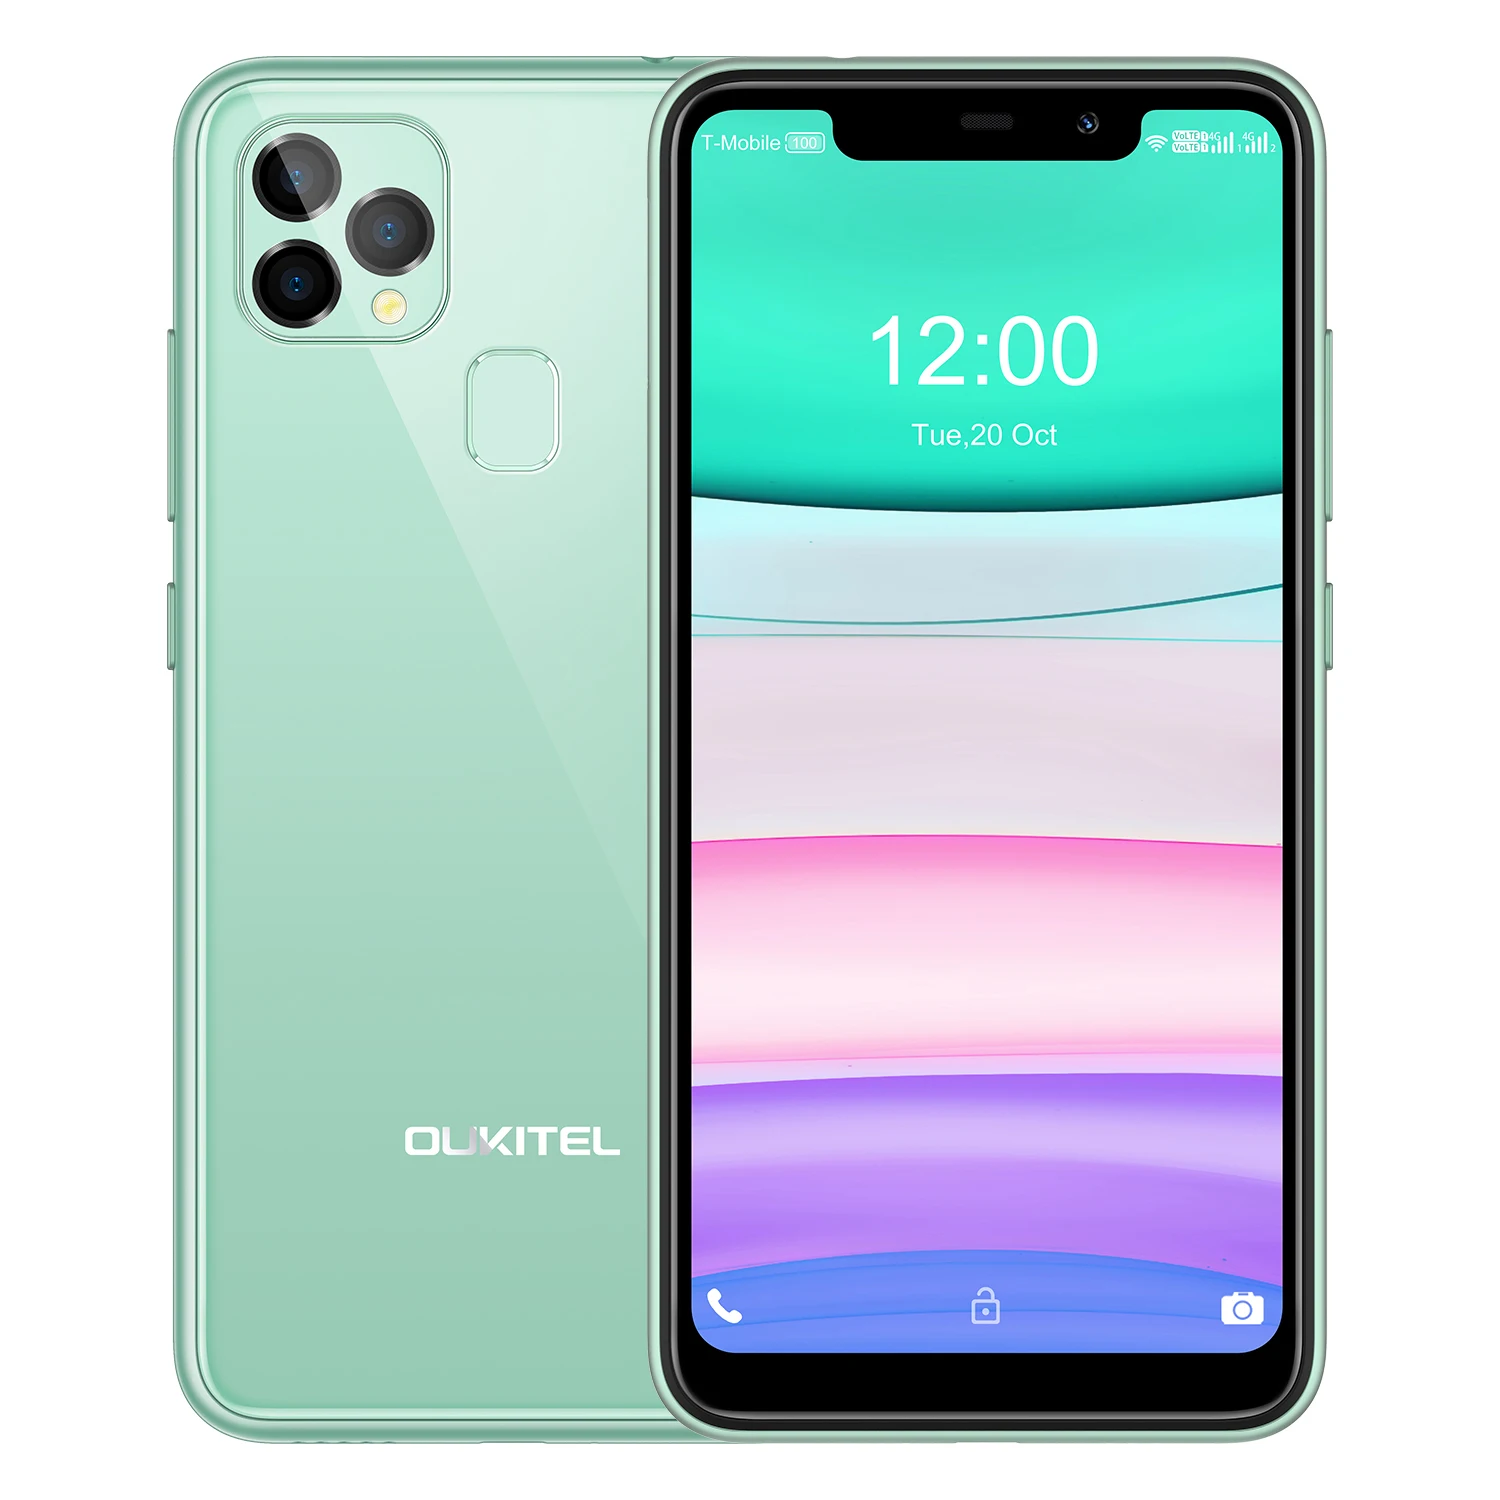 

Cheap price 4GB+128GB large memory Smartphone OUKITEL C22 5.86 inch 13MP Triple Camera Android 10.0 4G mobile phone, Green,black